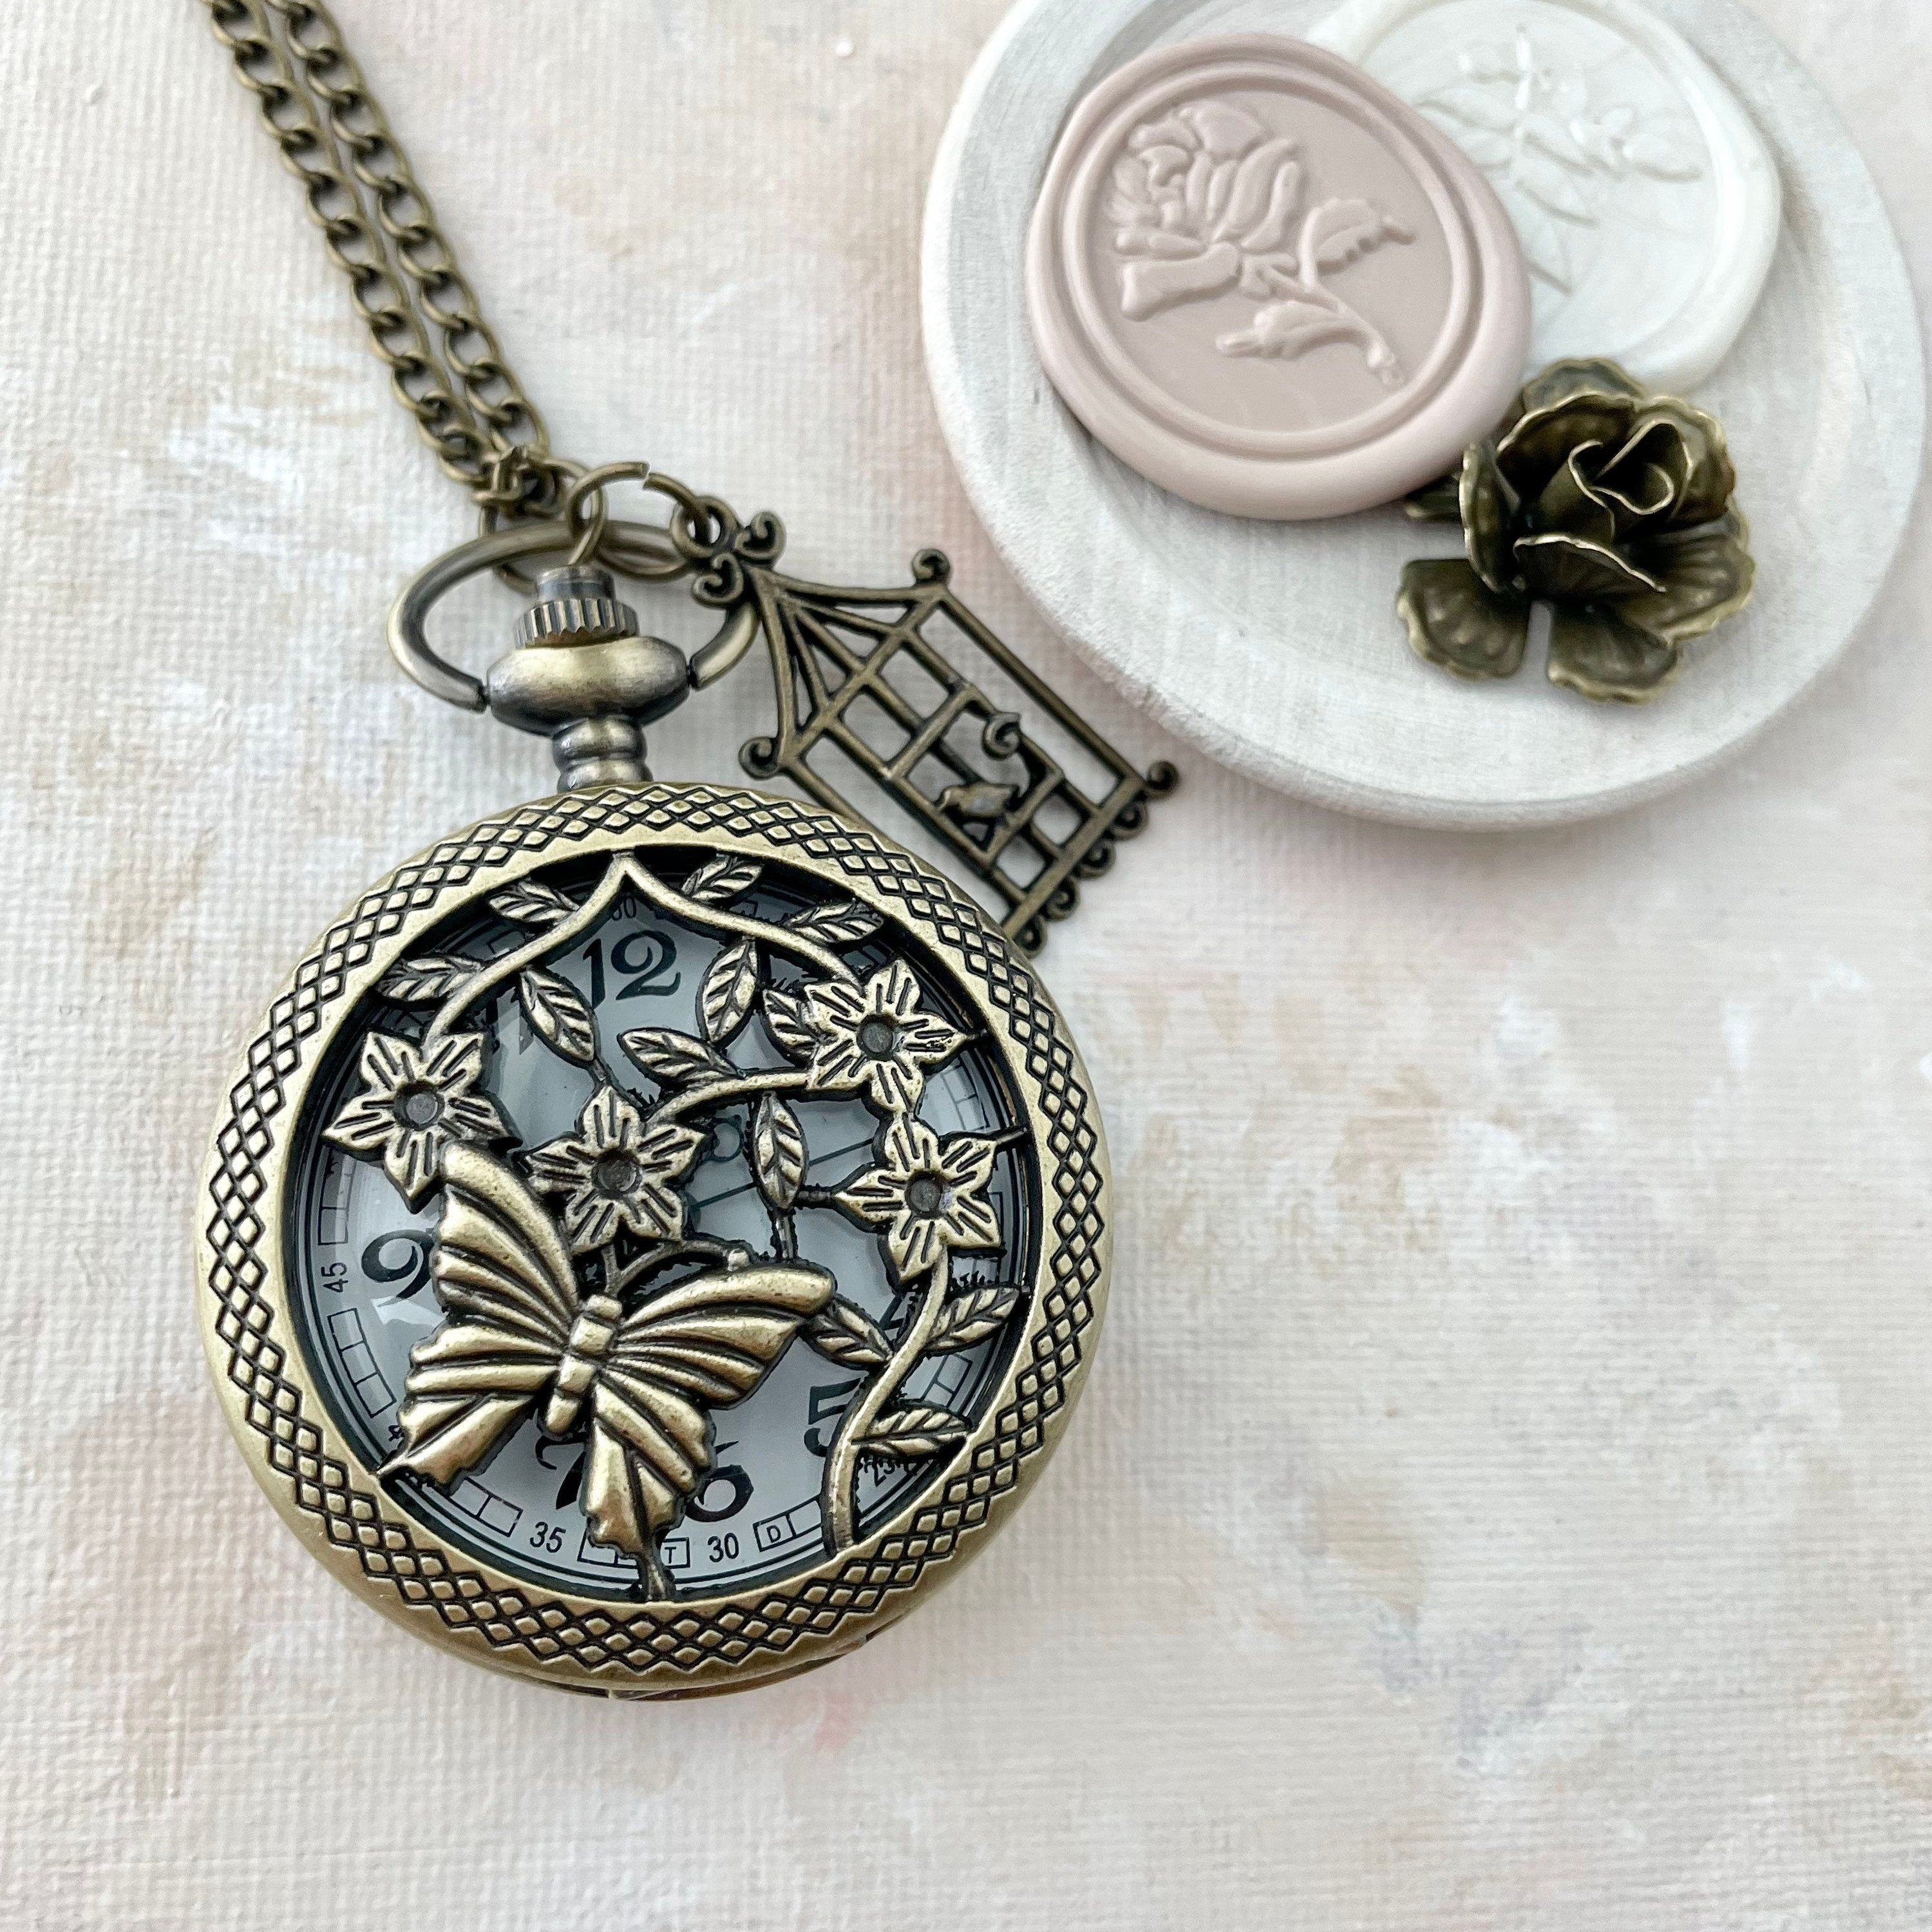 Vintage pocket watch styled with 2, neutral wax seals in white dish and one mini bronze styling flower -  Flat lay props from Champagne & GRIT